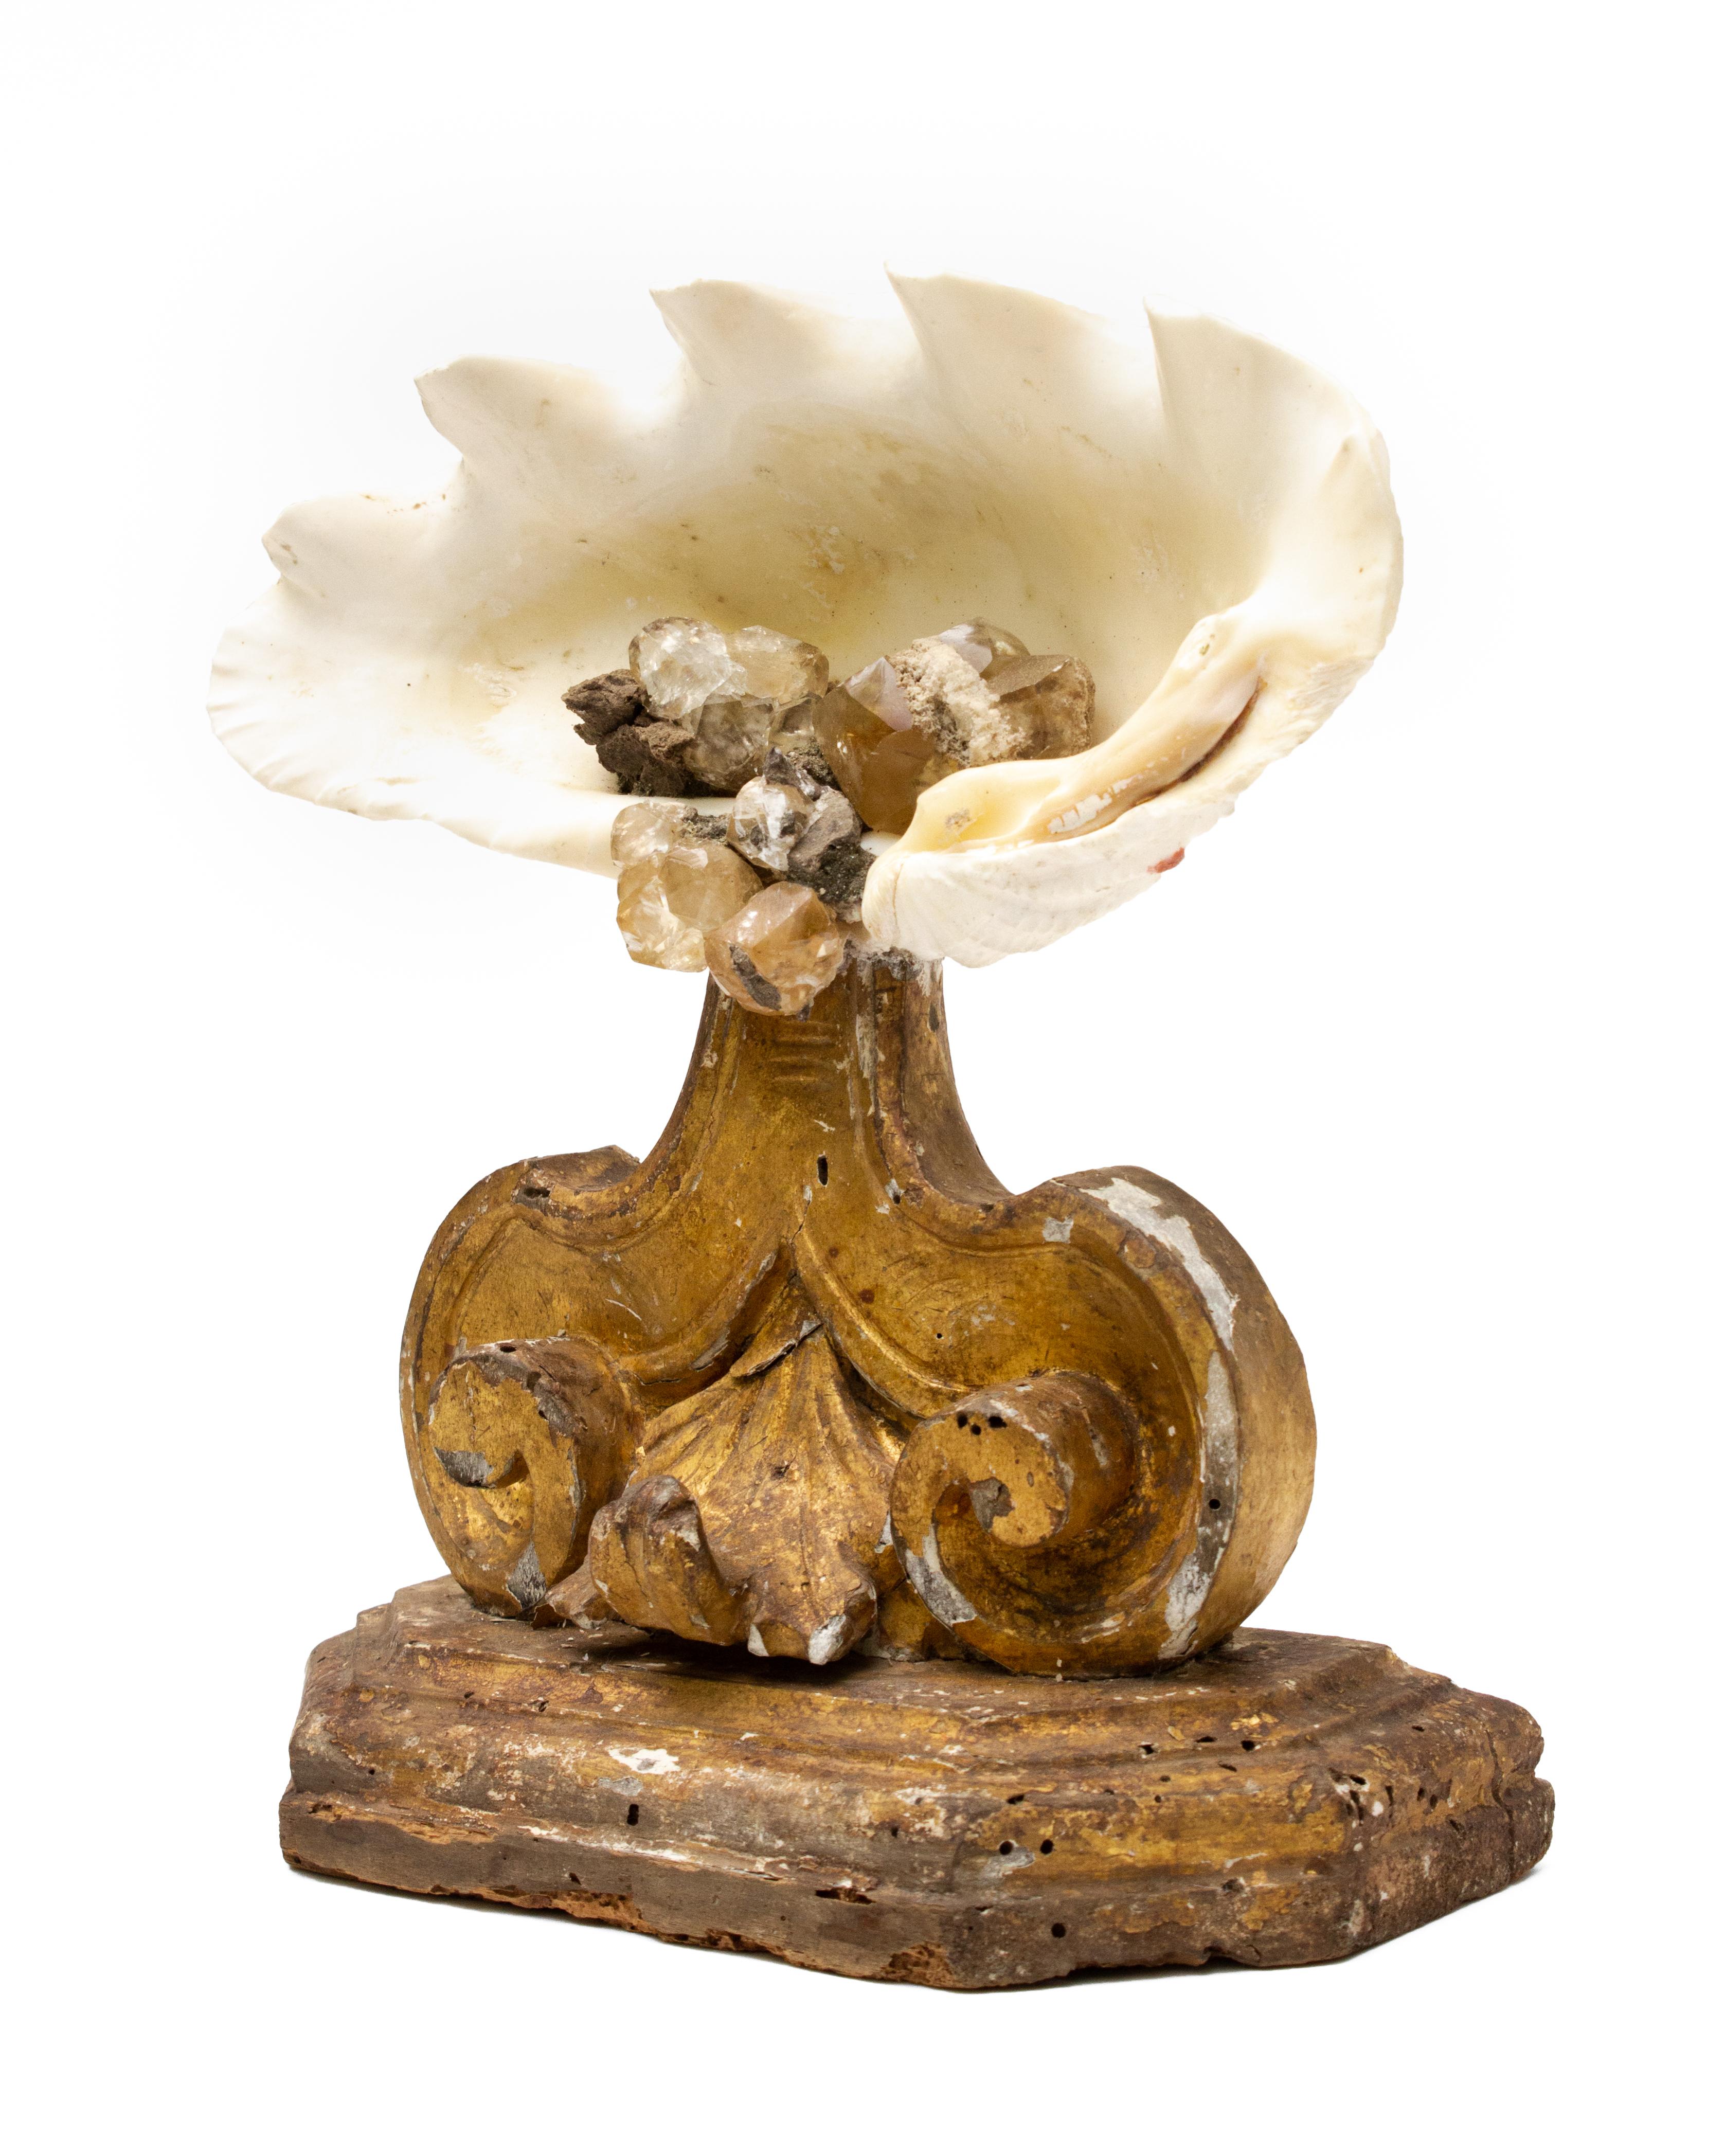 17th century Italian (Tuscan) alter-base decorated with a fossil clam shell and calcite crystal clusters from the Elwood mine (noted in American Mineral Treasure pg. 337).